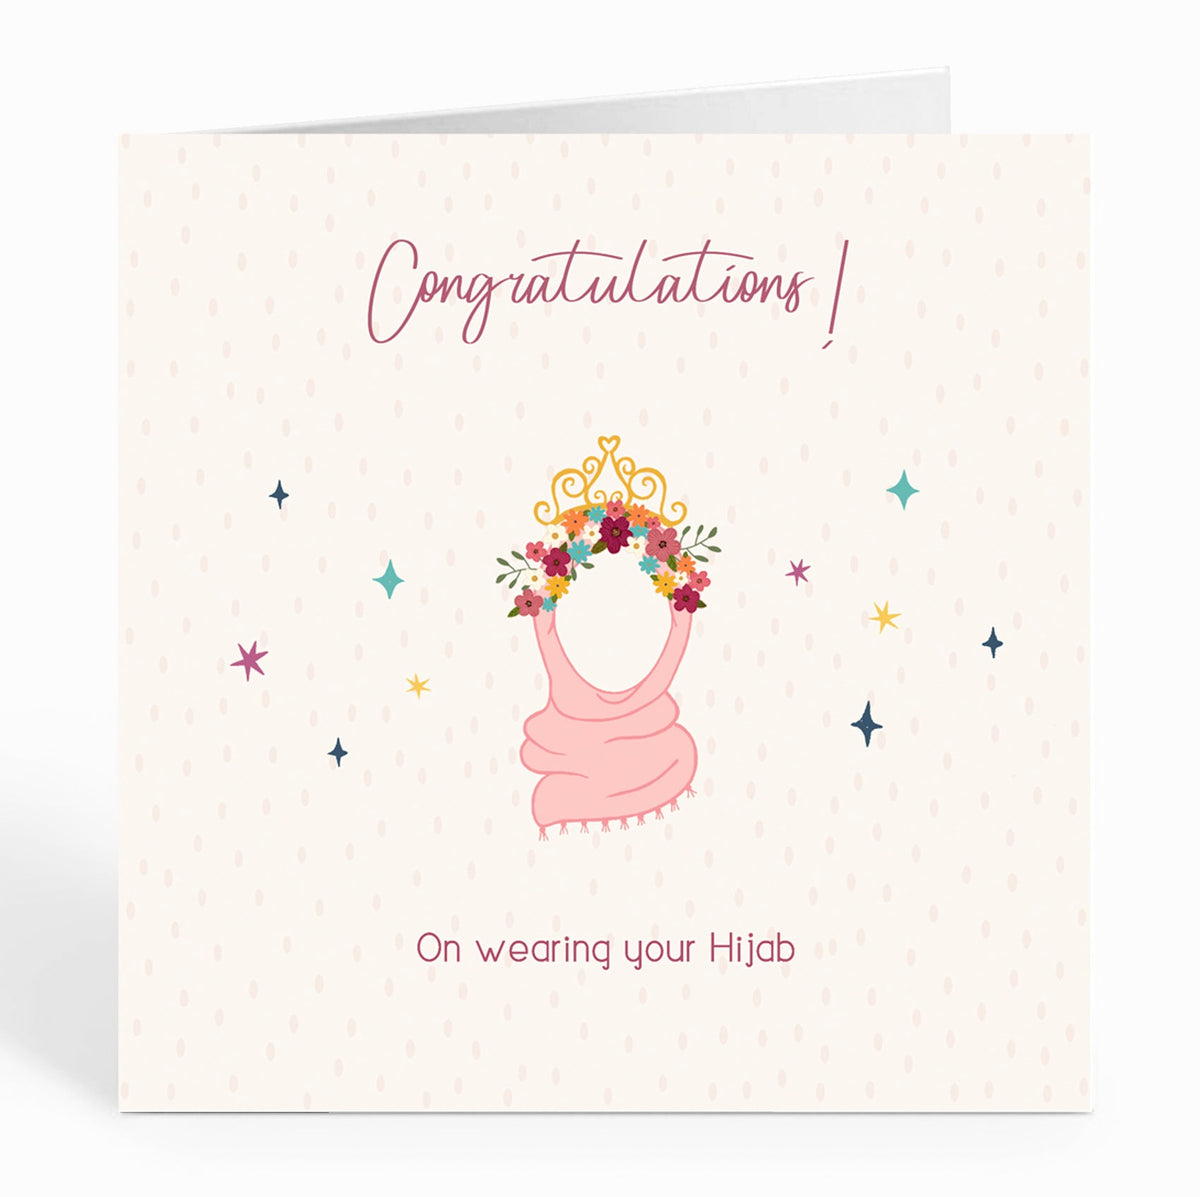 Congratulations! On wearing your Hijab